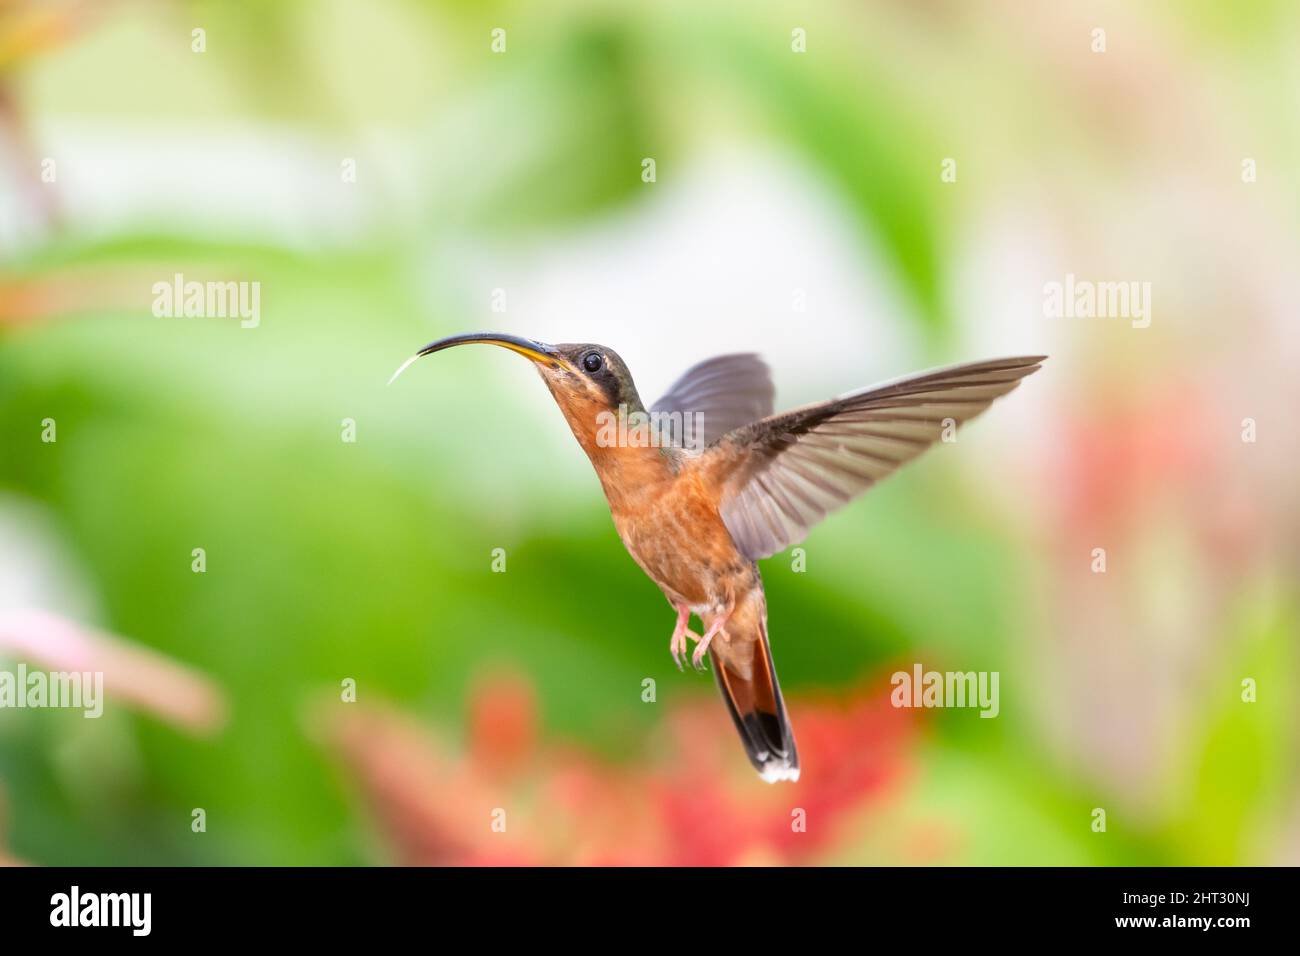 Rufous-breasted Hermit hummingbird, Glaucis hirsutus, hovering in the air with his tongue out. Stock Photo